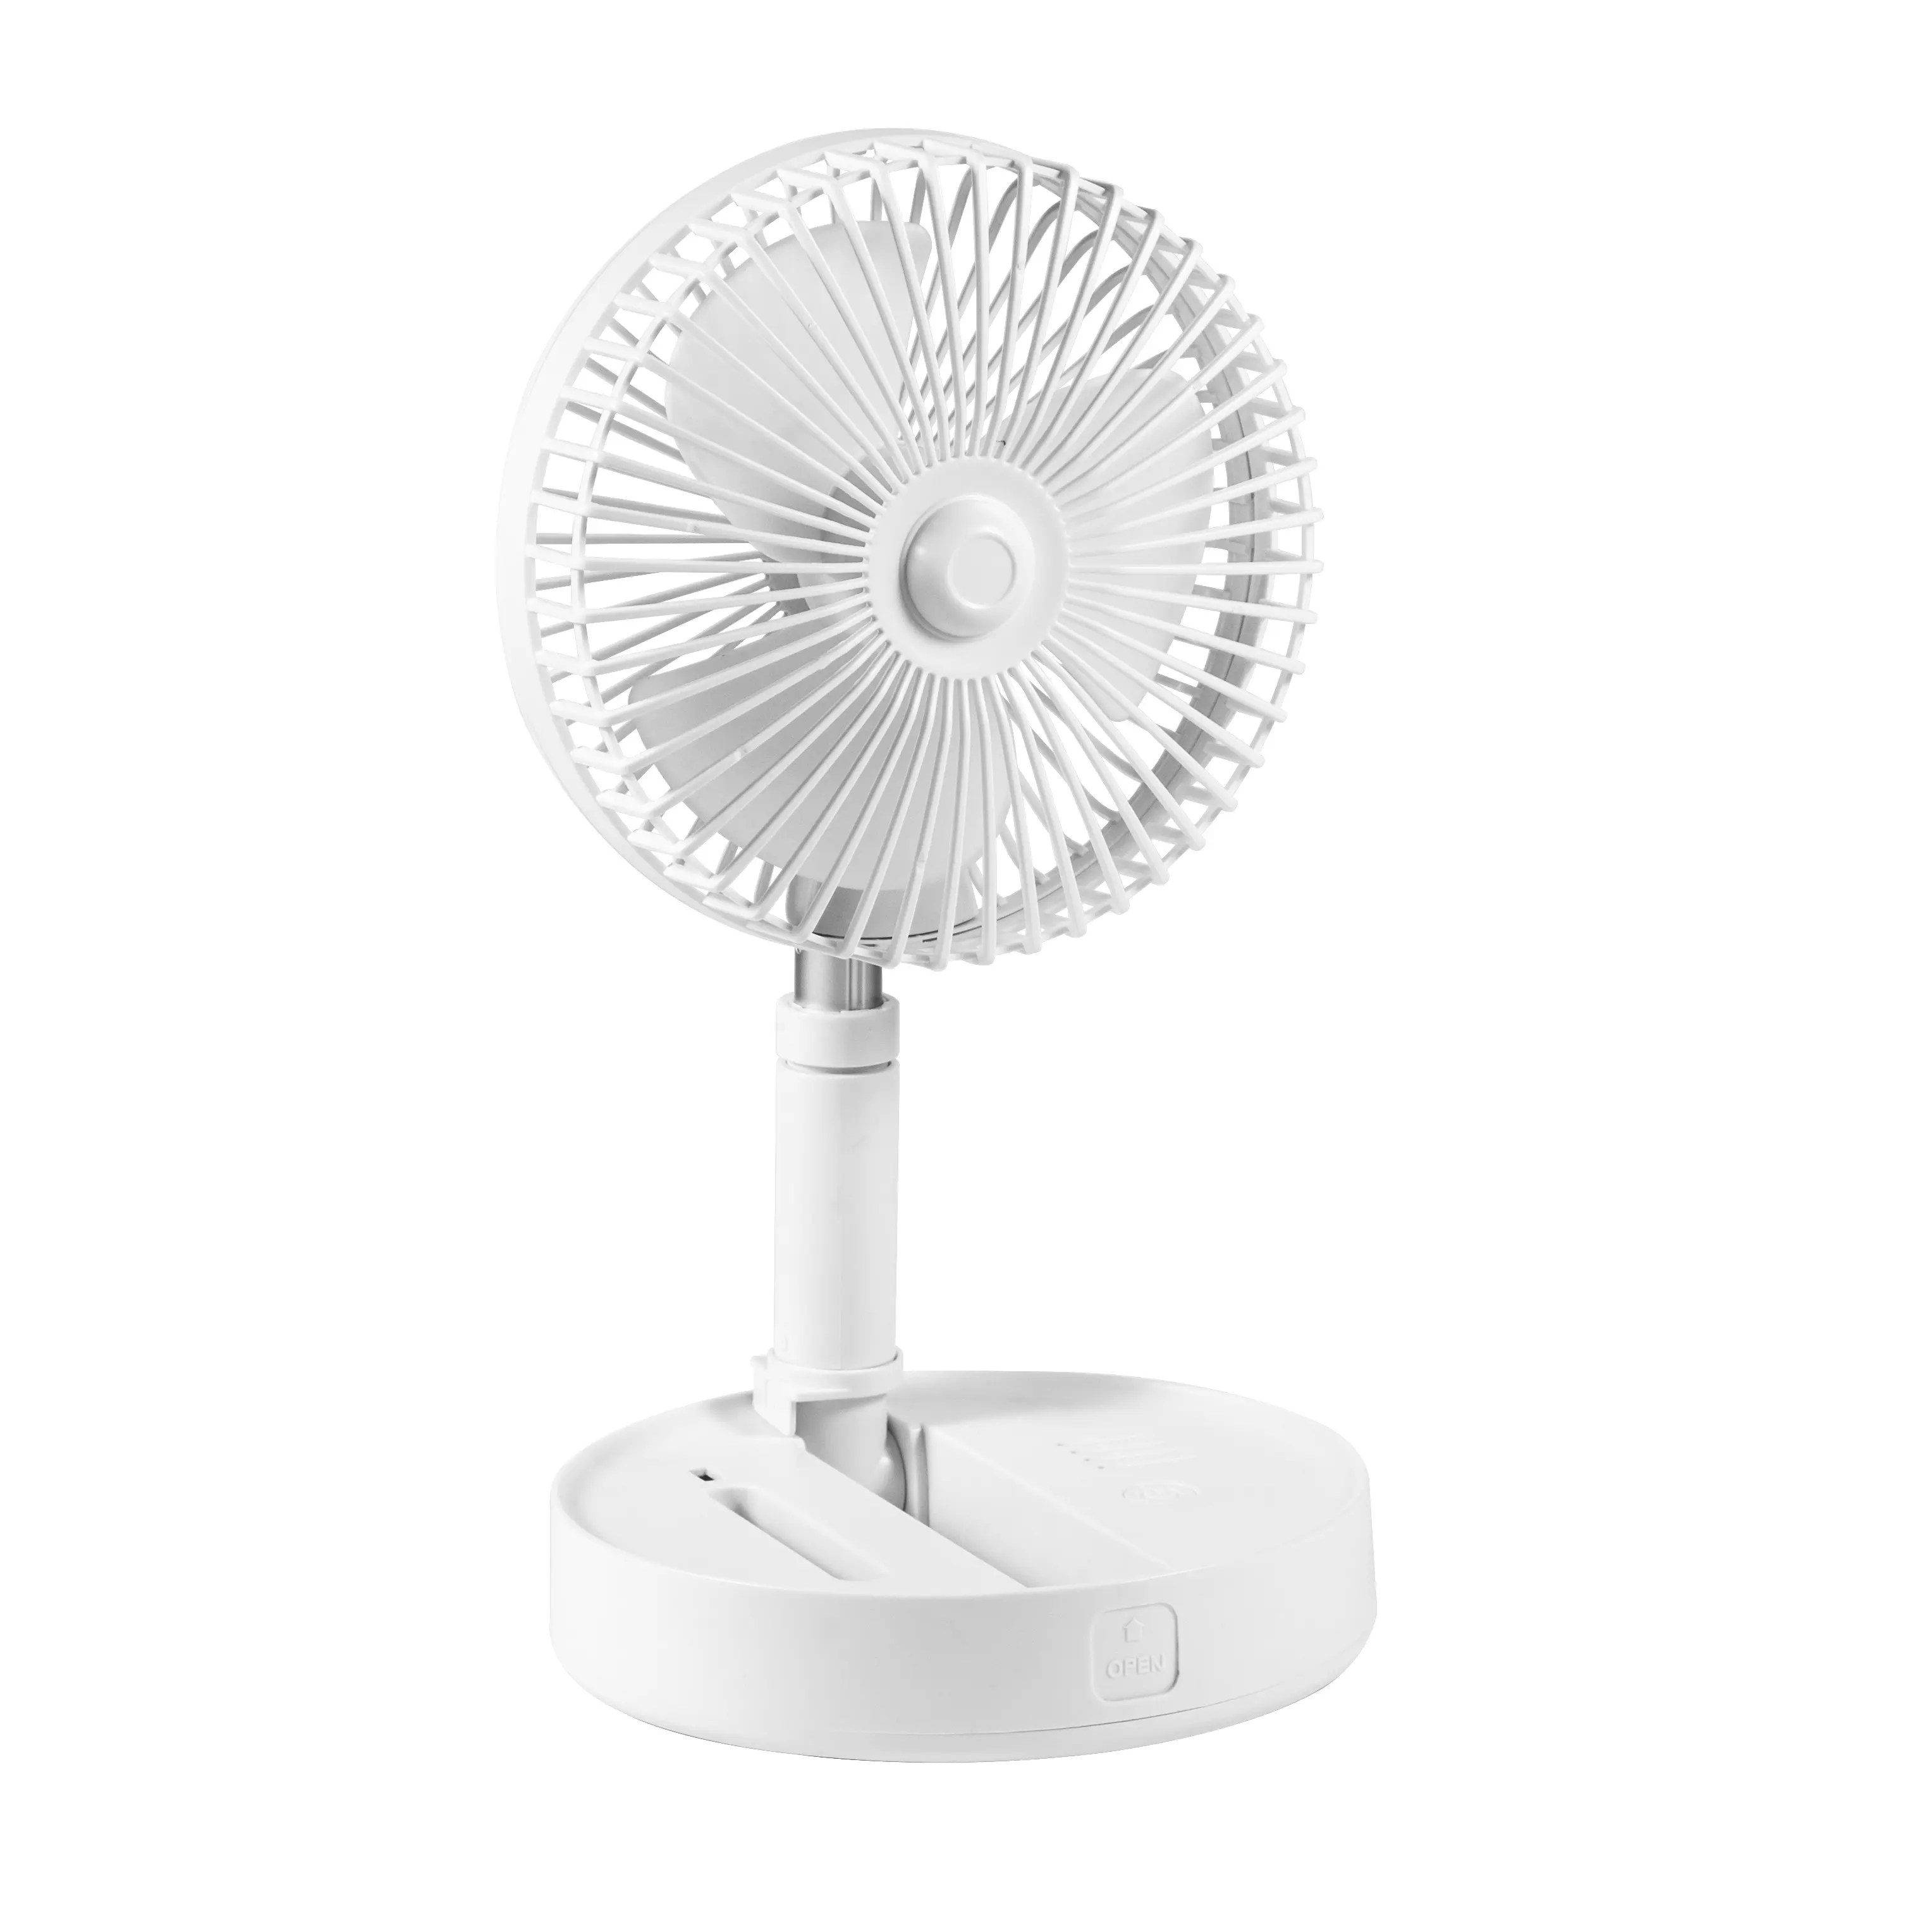 Rechargeable Fans Multi-function Electric Table Fan Air Cooling Fan Digital Plastic Remote Control Folding Charge Your Phone 3.7